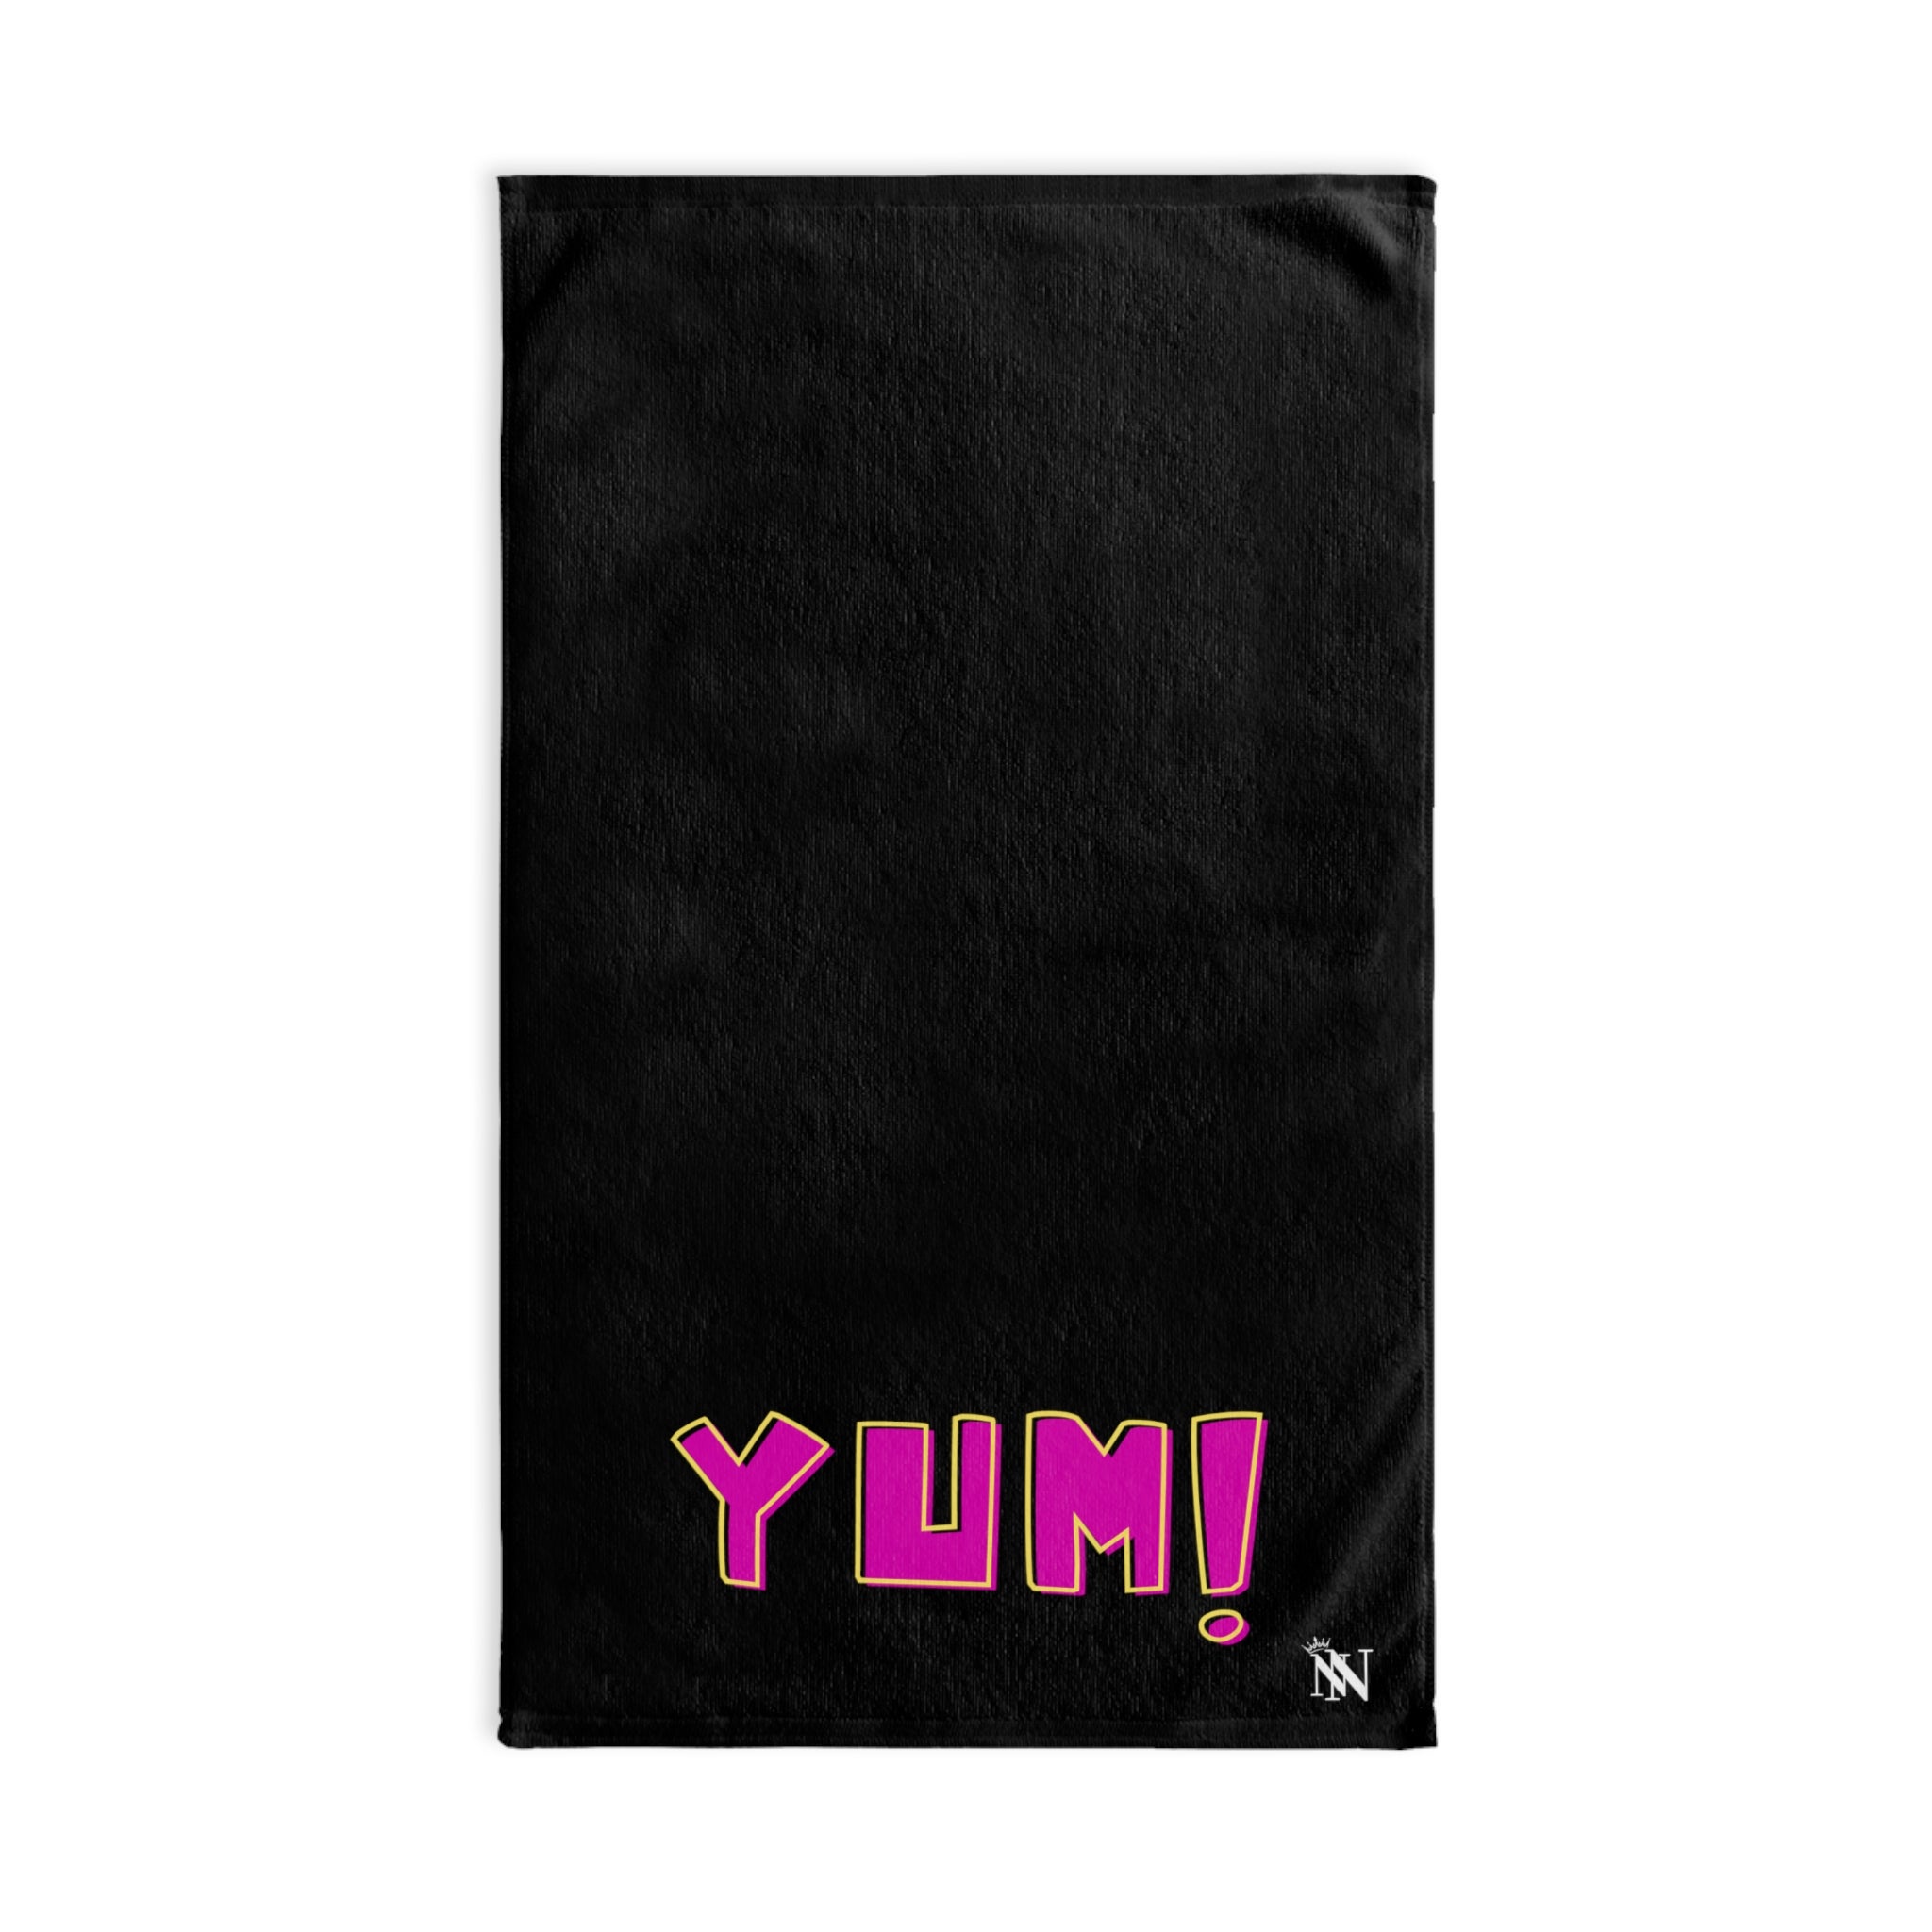 YUM! Black | Sexy Gifts for Boyfriend, Funny Towel Romantic Gift for Wedding Couple Fiance First Year 2nd Anniversary Valentines, Party Gag Gifts, Joke Humor Cloth for Husband Men BF NECTAR NAPKINS